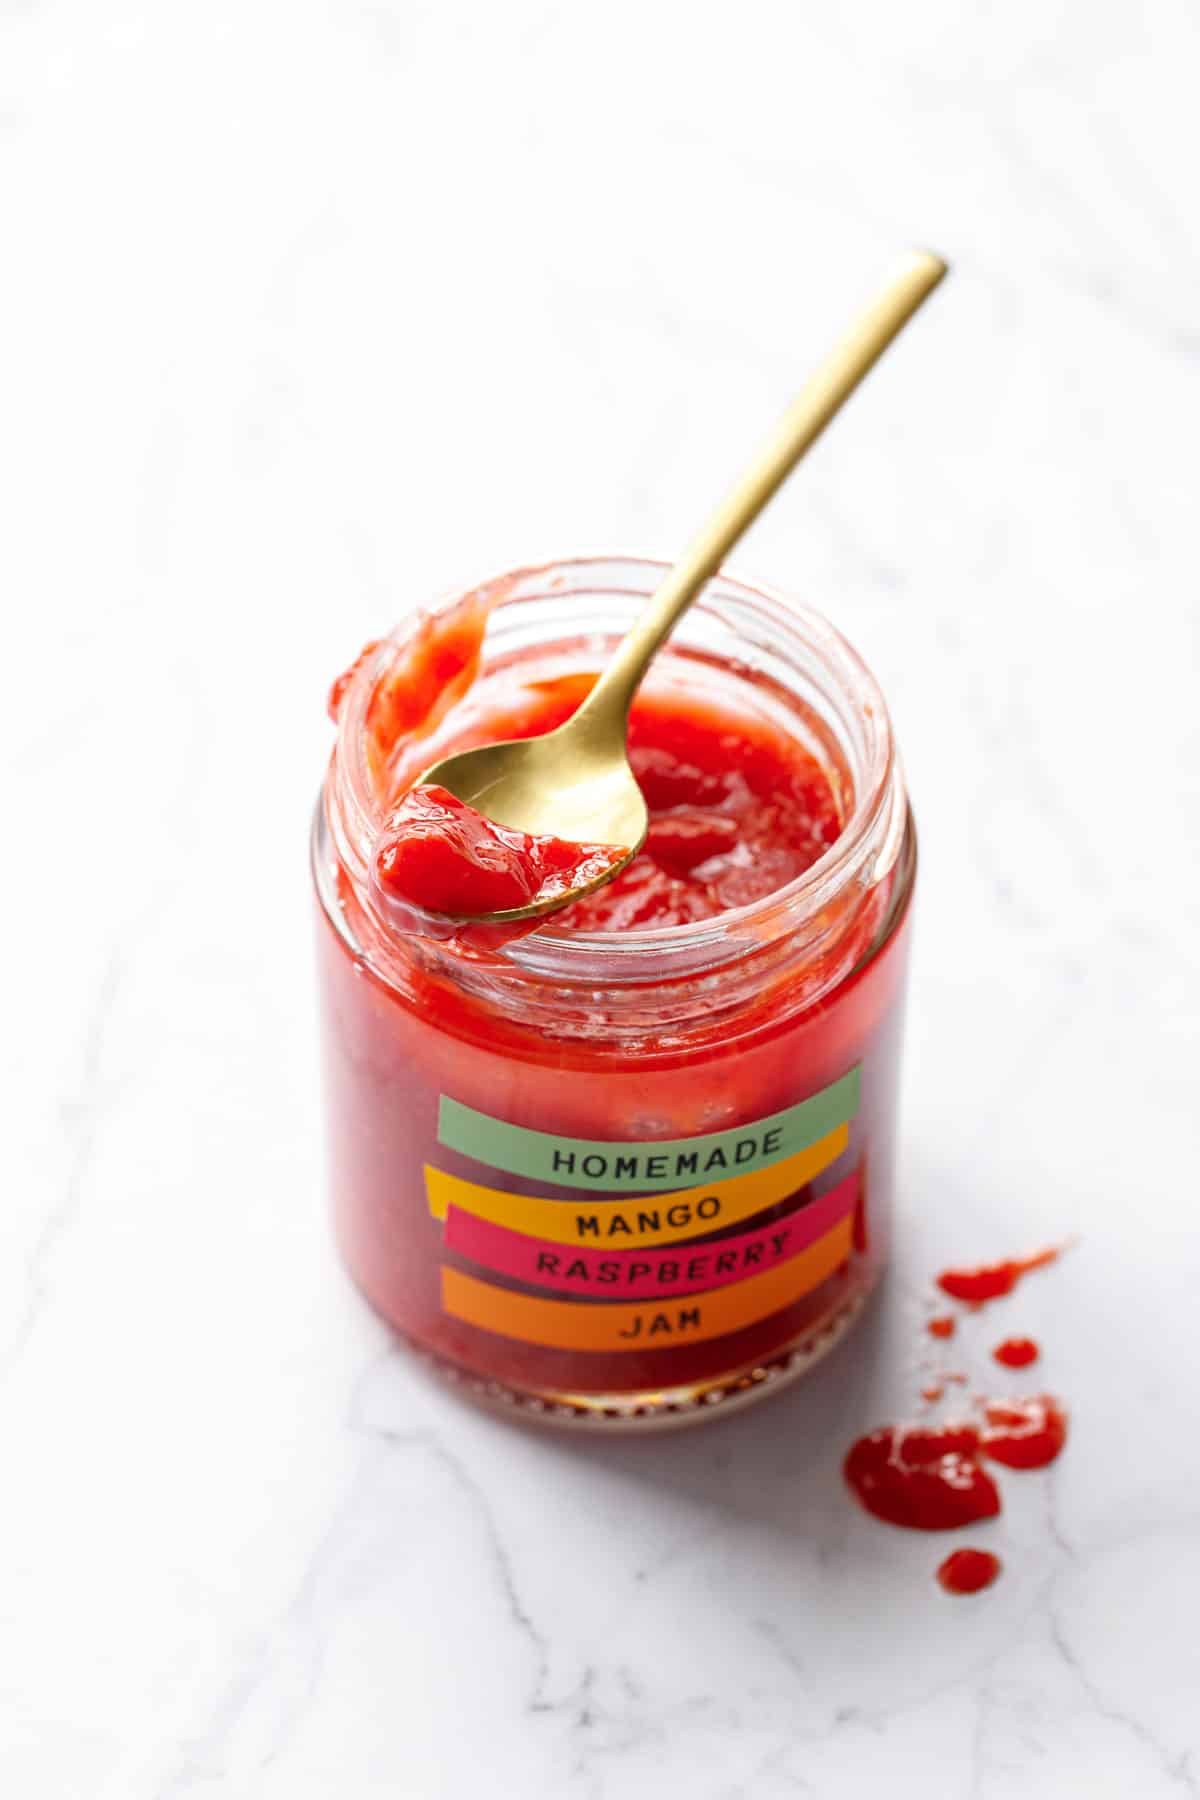 Open jar of Mango Raspberry Jam with a gold spoon propped on top full of jam to show the smooth texture.